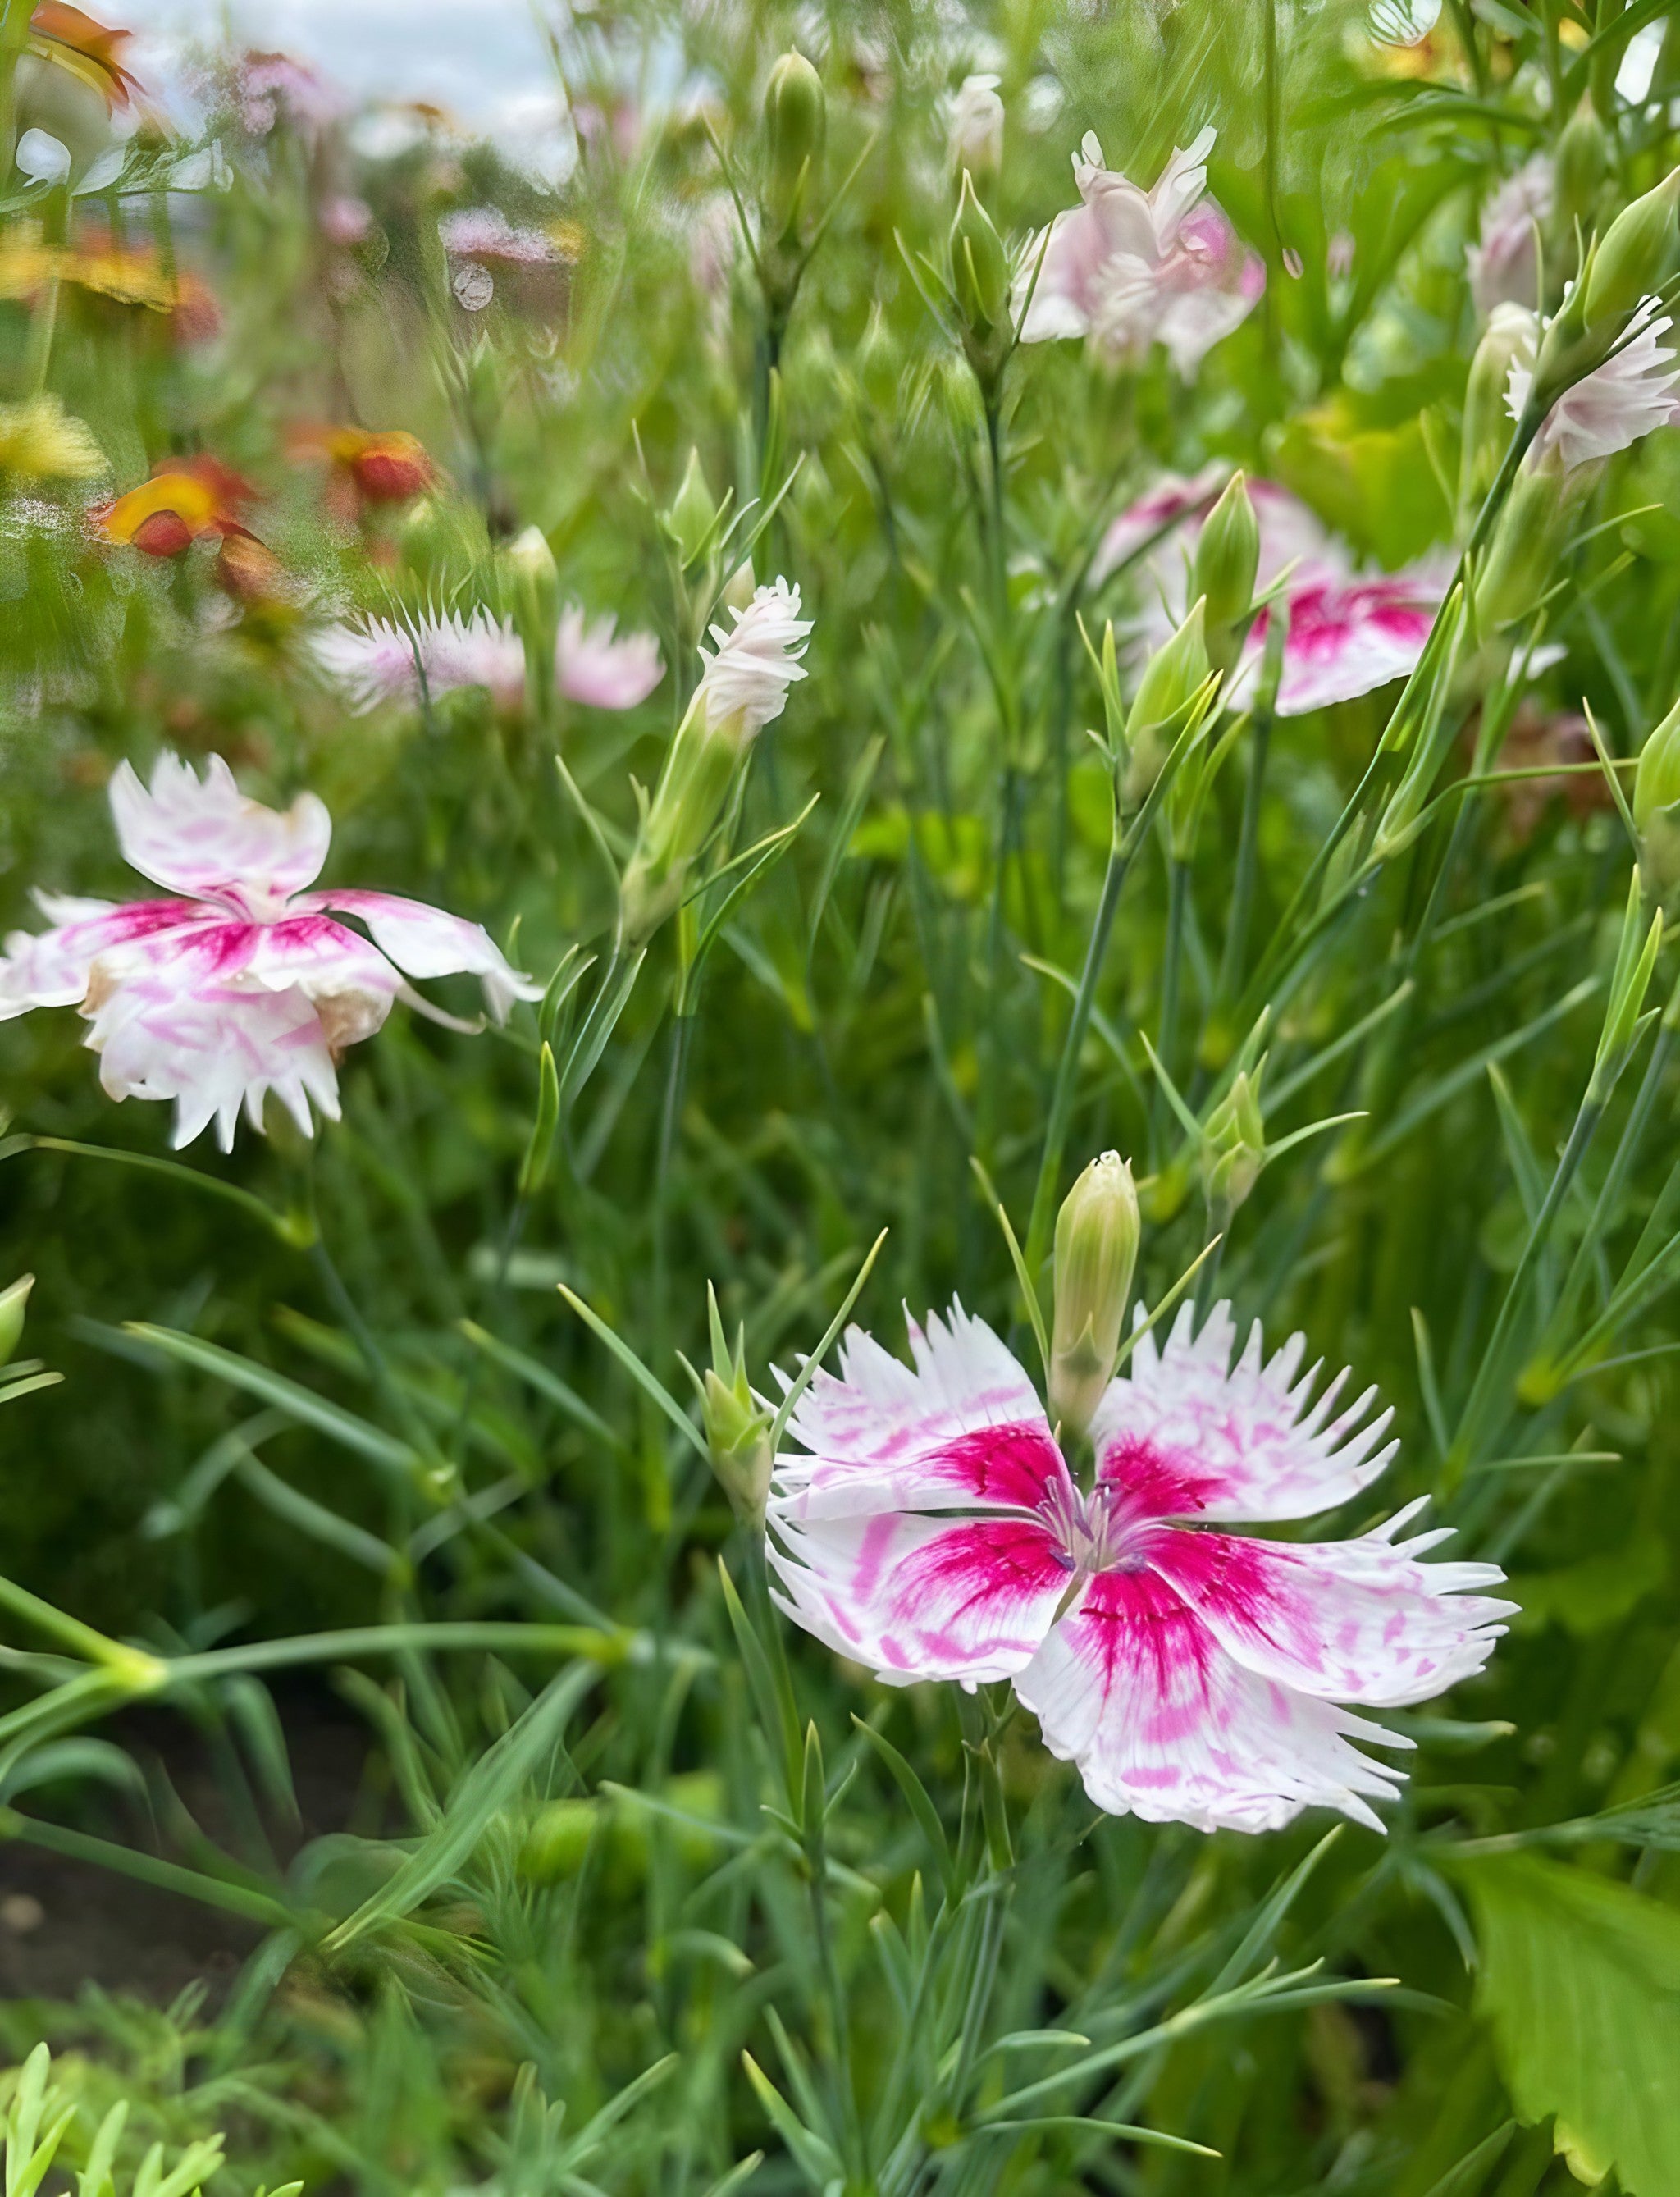 Cluster of Dianthus Heddewegii Gaiety Single Mix blossoms in natural garden setting